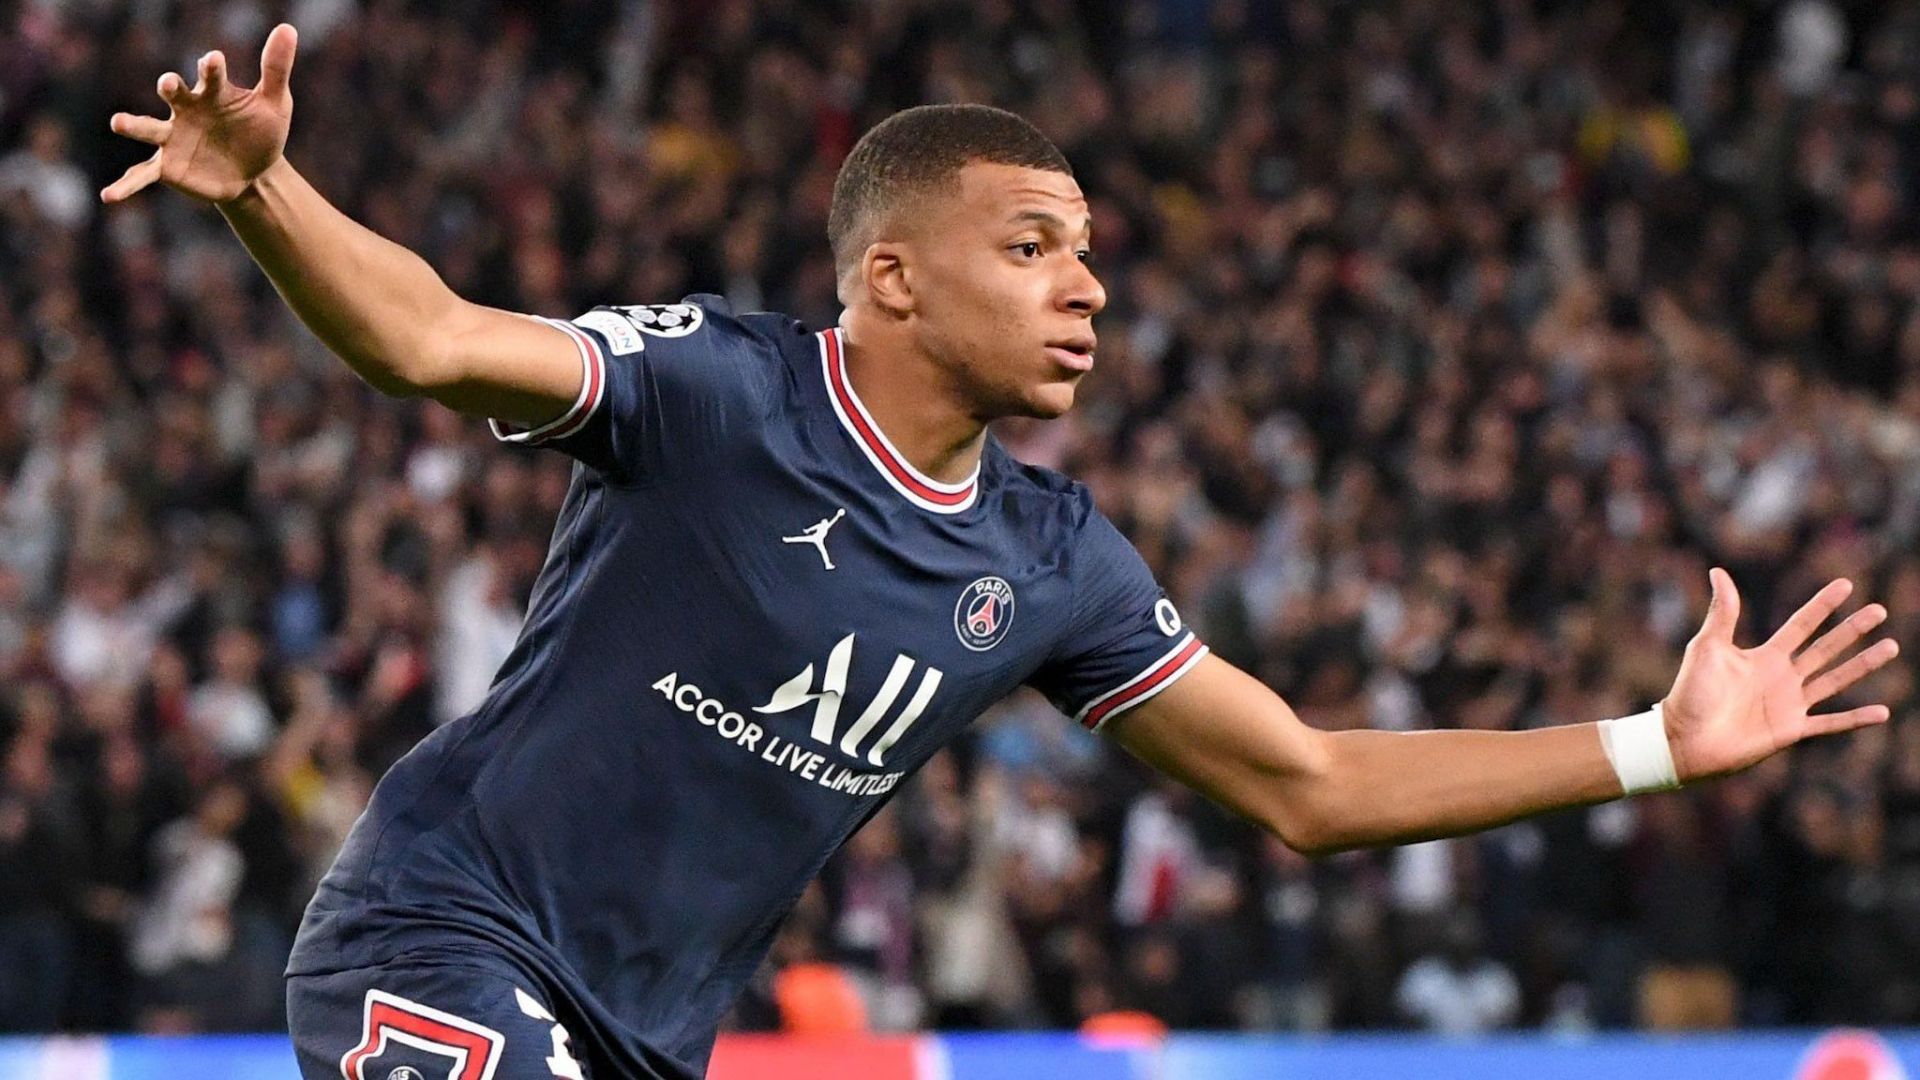 Kylian Mbappe embodies all the attributes expected of a modern-day attacker.